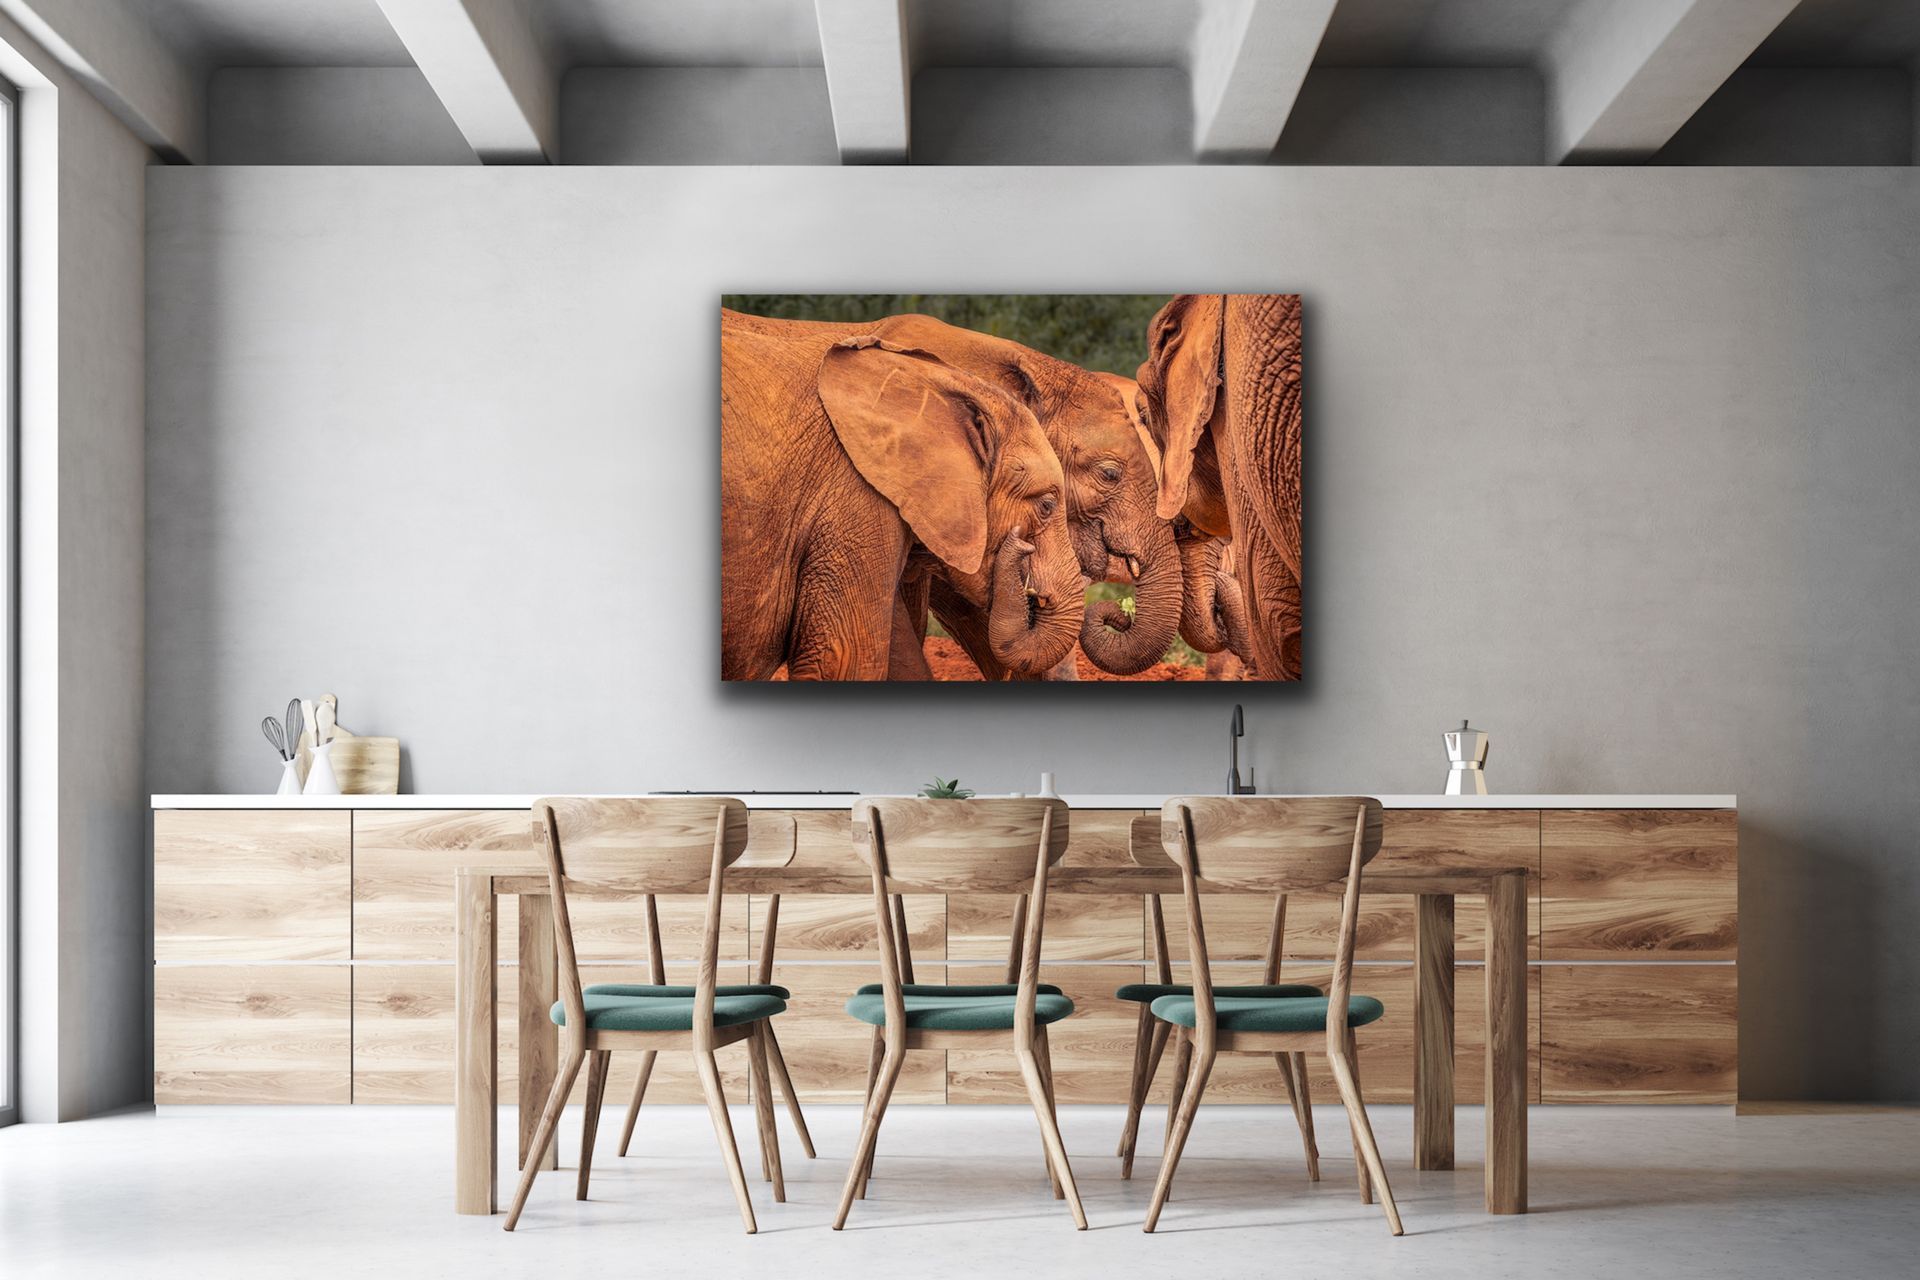 Example of image # Elephant GP D853918 on a wall in a home